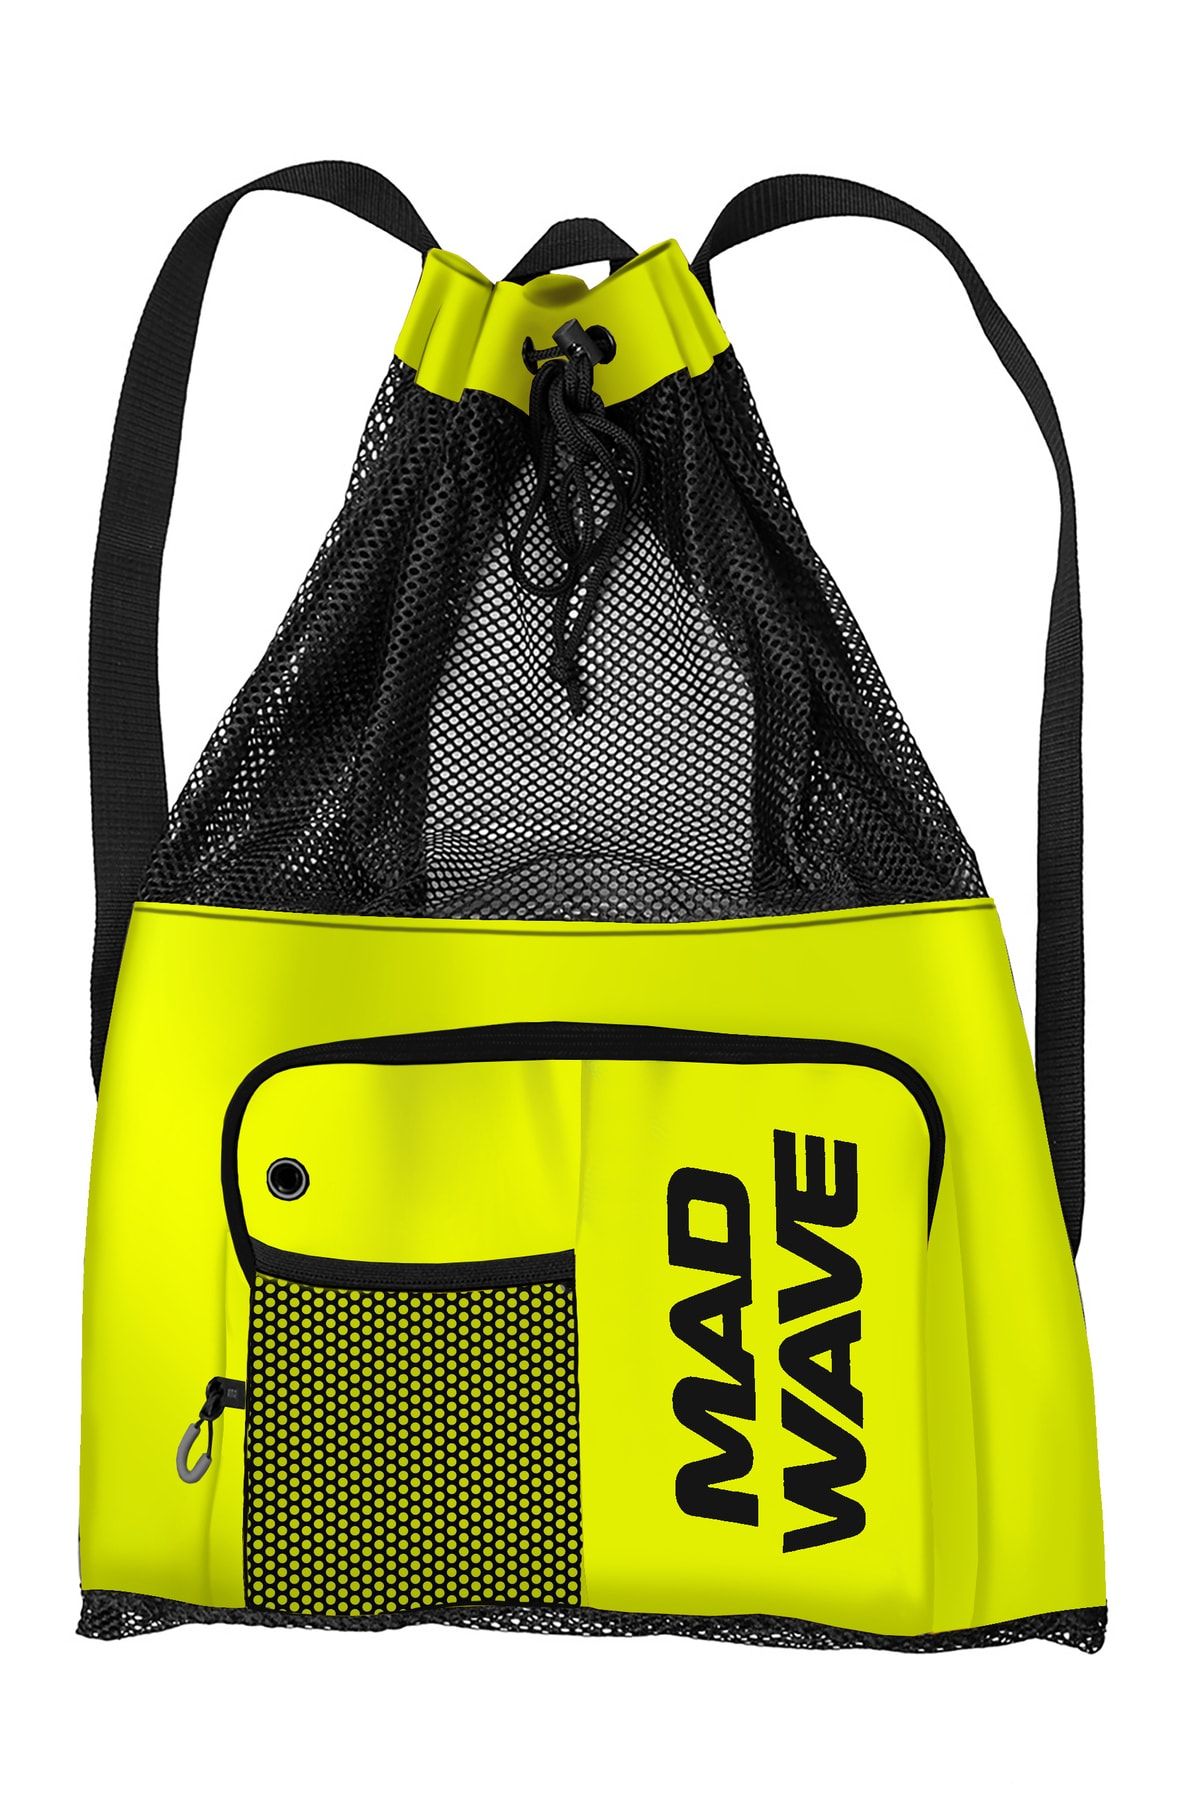 Mad Wave M1110 06 0 10W Bags VENT DRY BAG, 65*48.5 cm, Yell